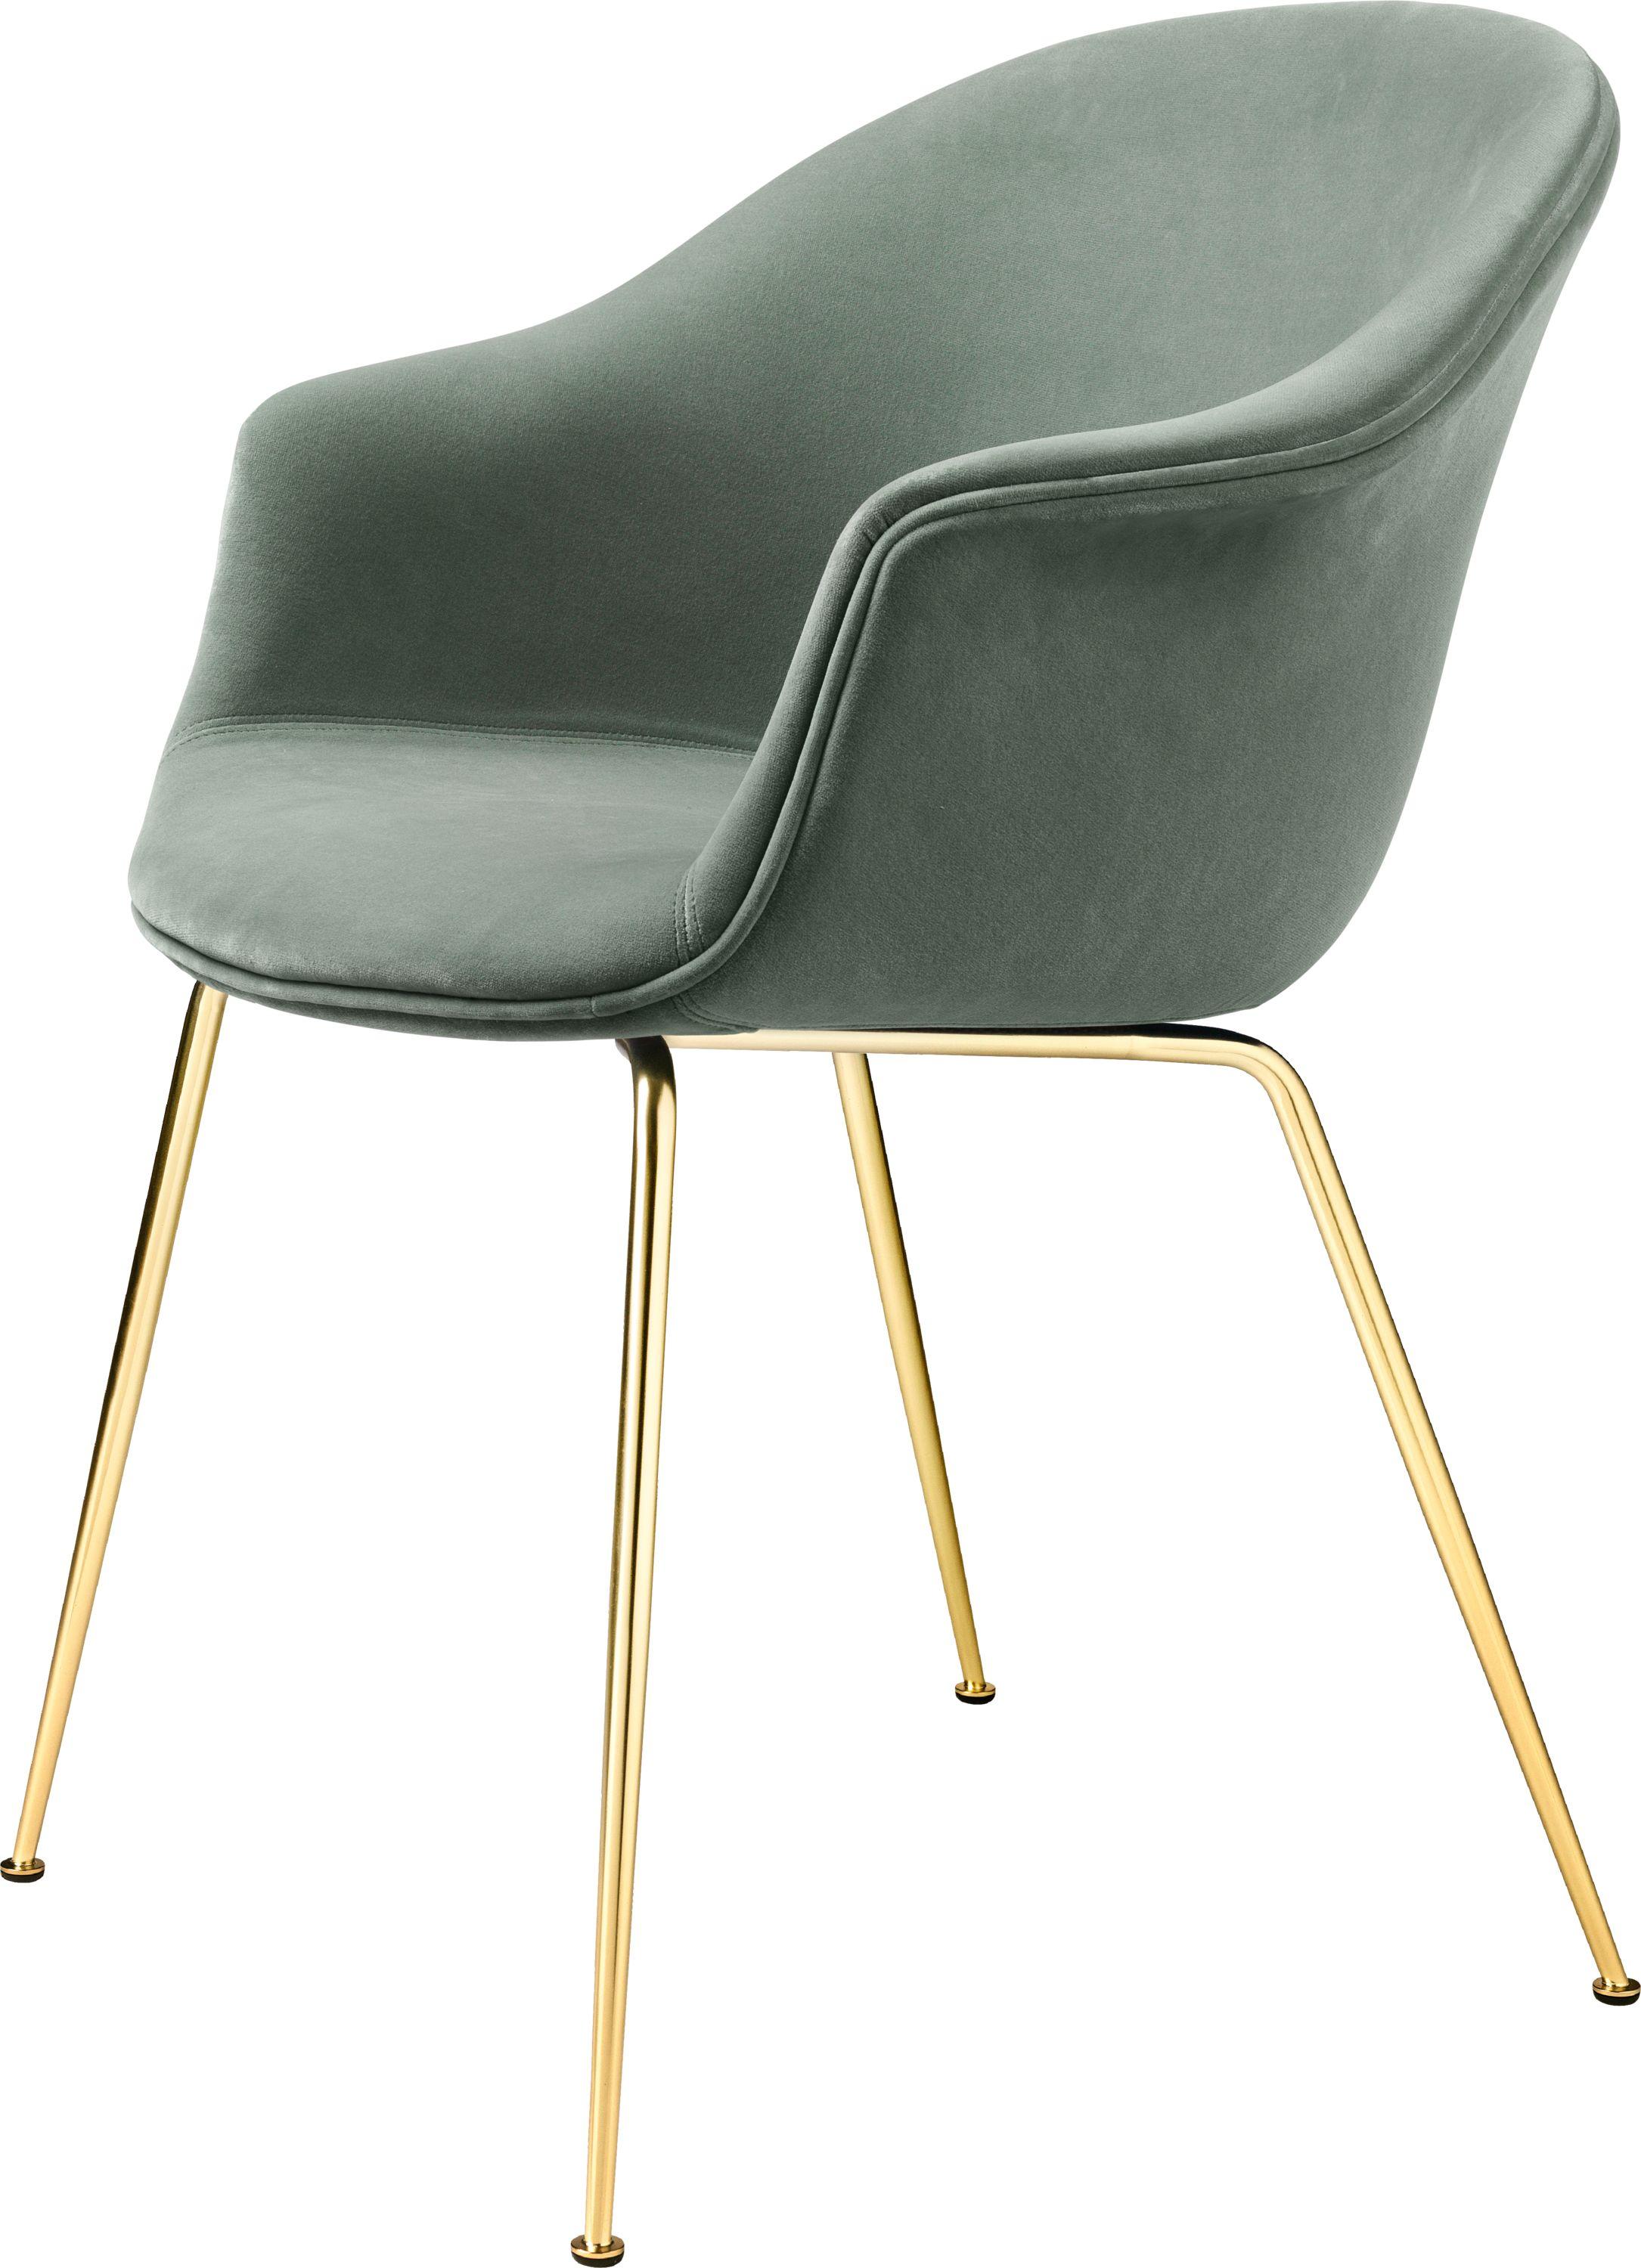 GamFratesi 'Bat' Dining Chair in Grey with Antique Brass Conic Base 6